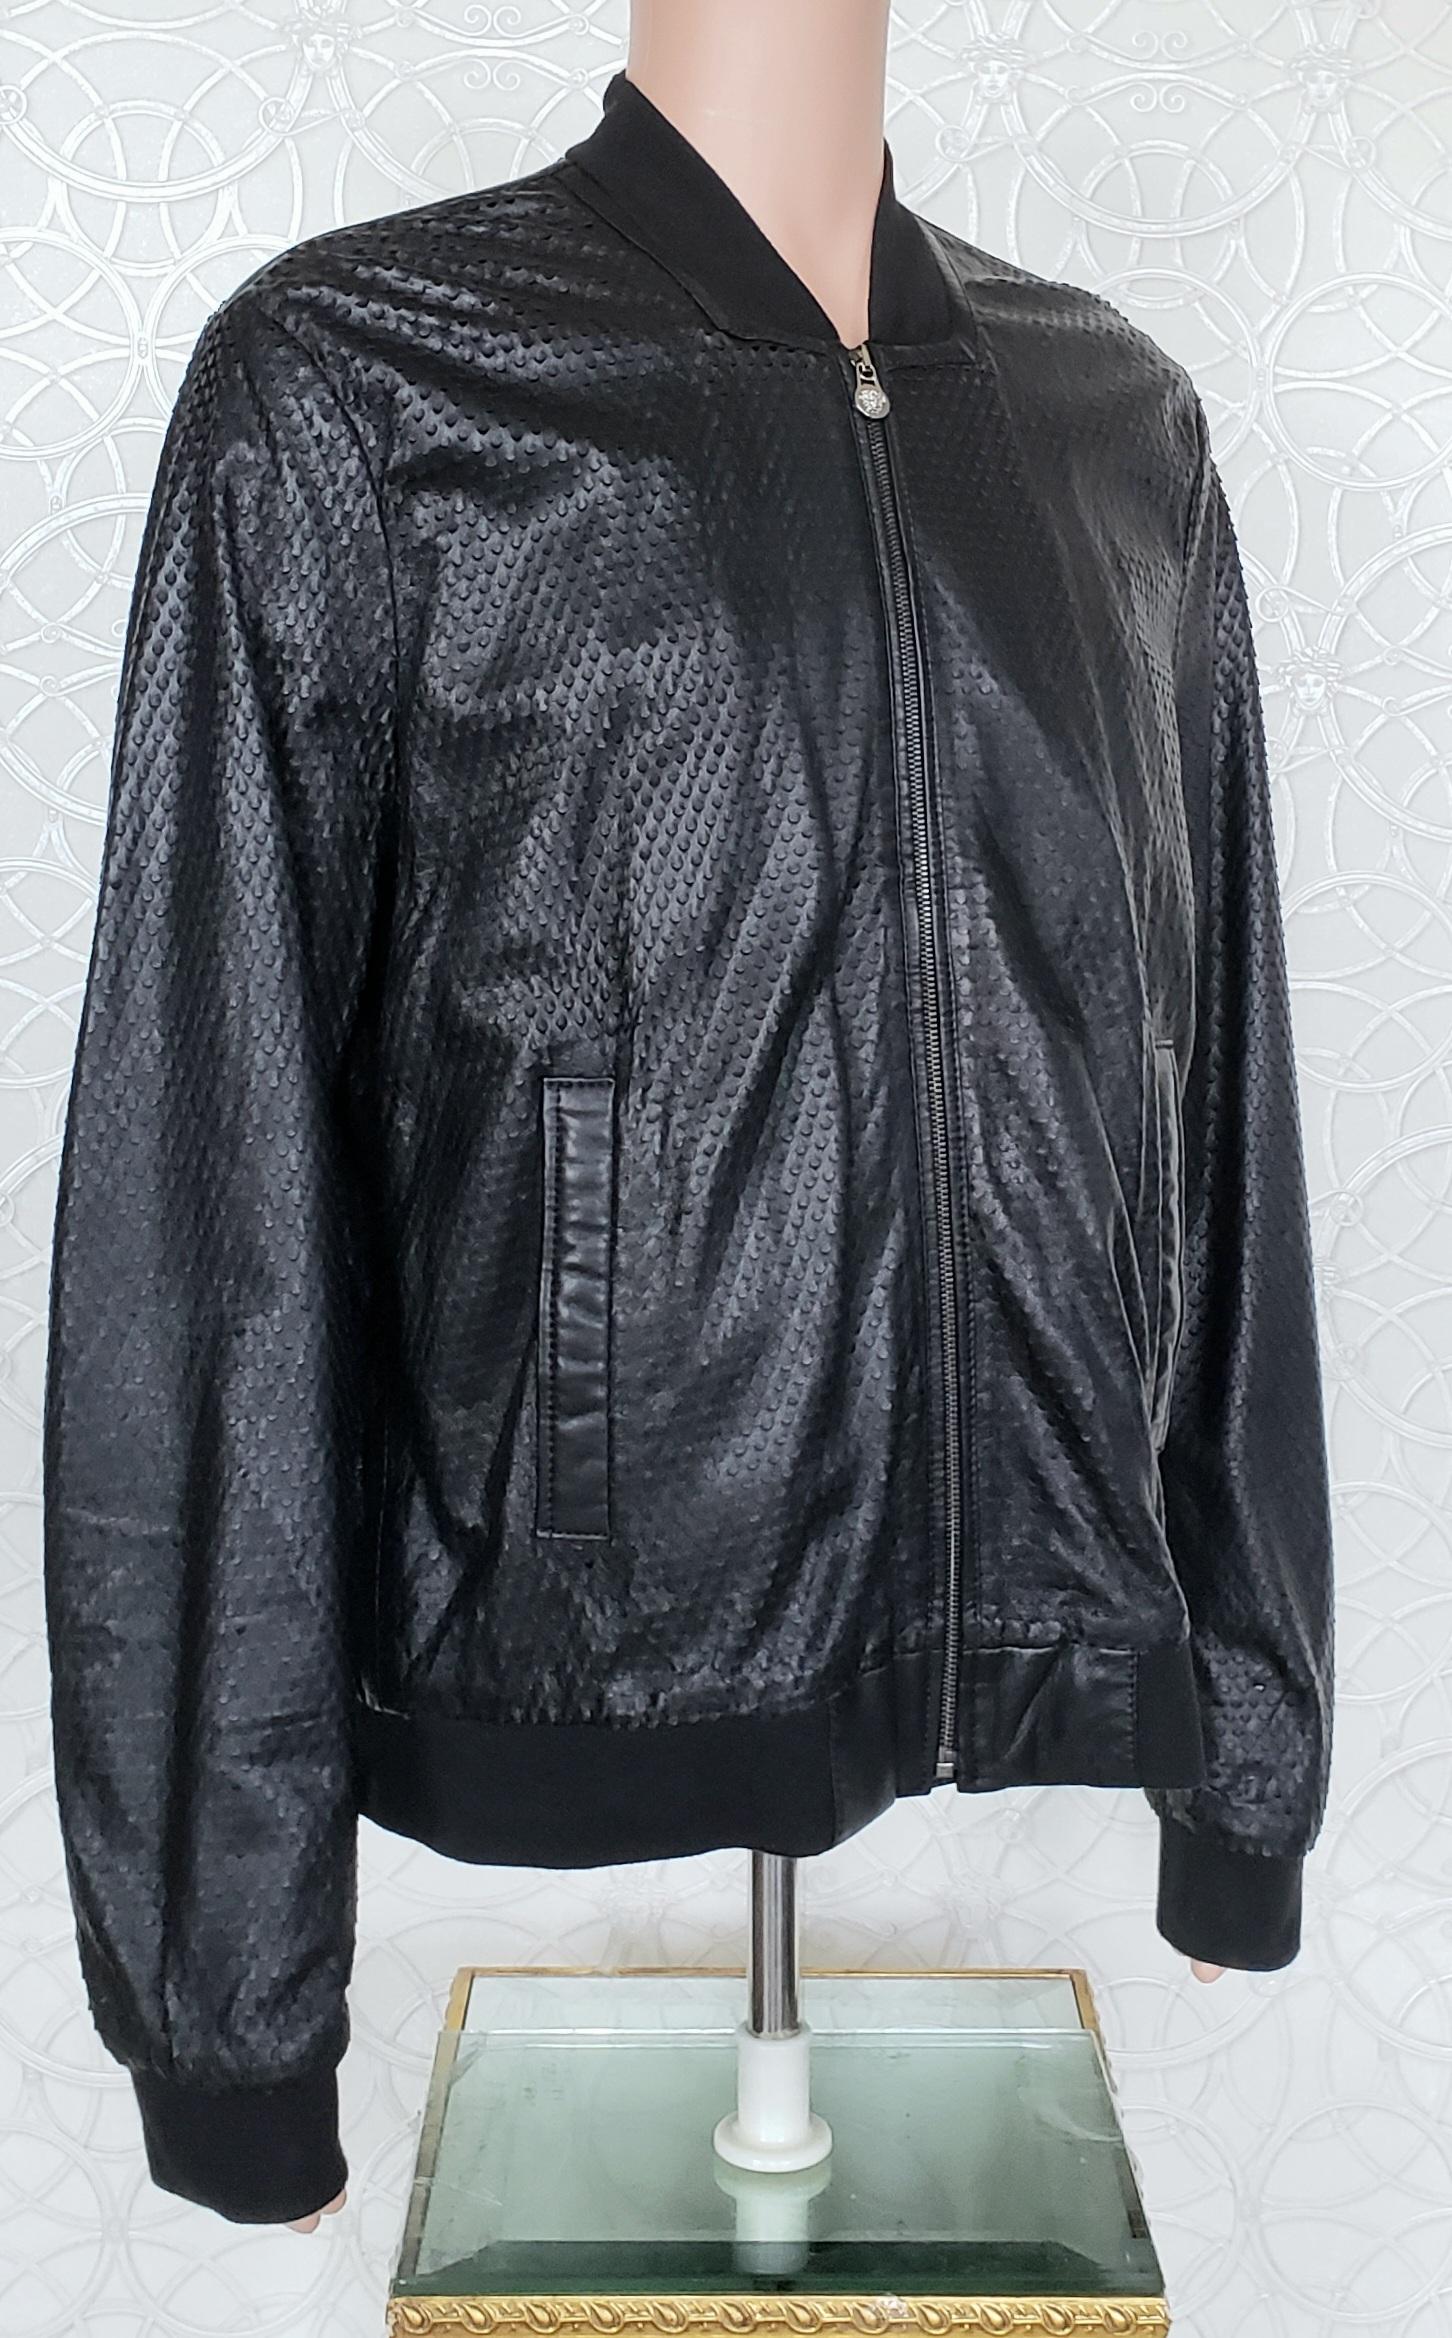 Men's New VERSACE COLLECTION PERFORATED LAMB LEATHER BLACK BOMBER JACKET 56 - 3XL For Sale